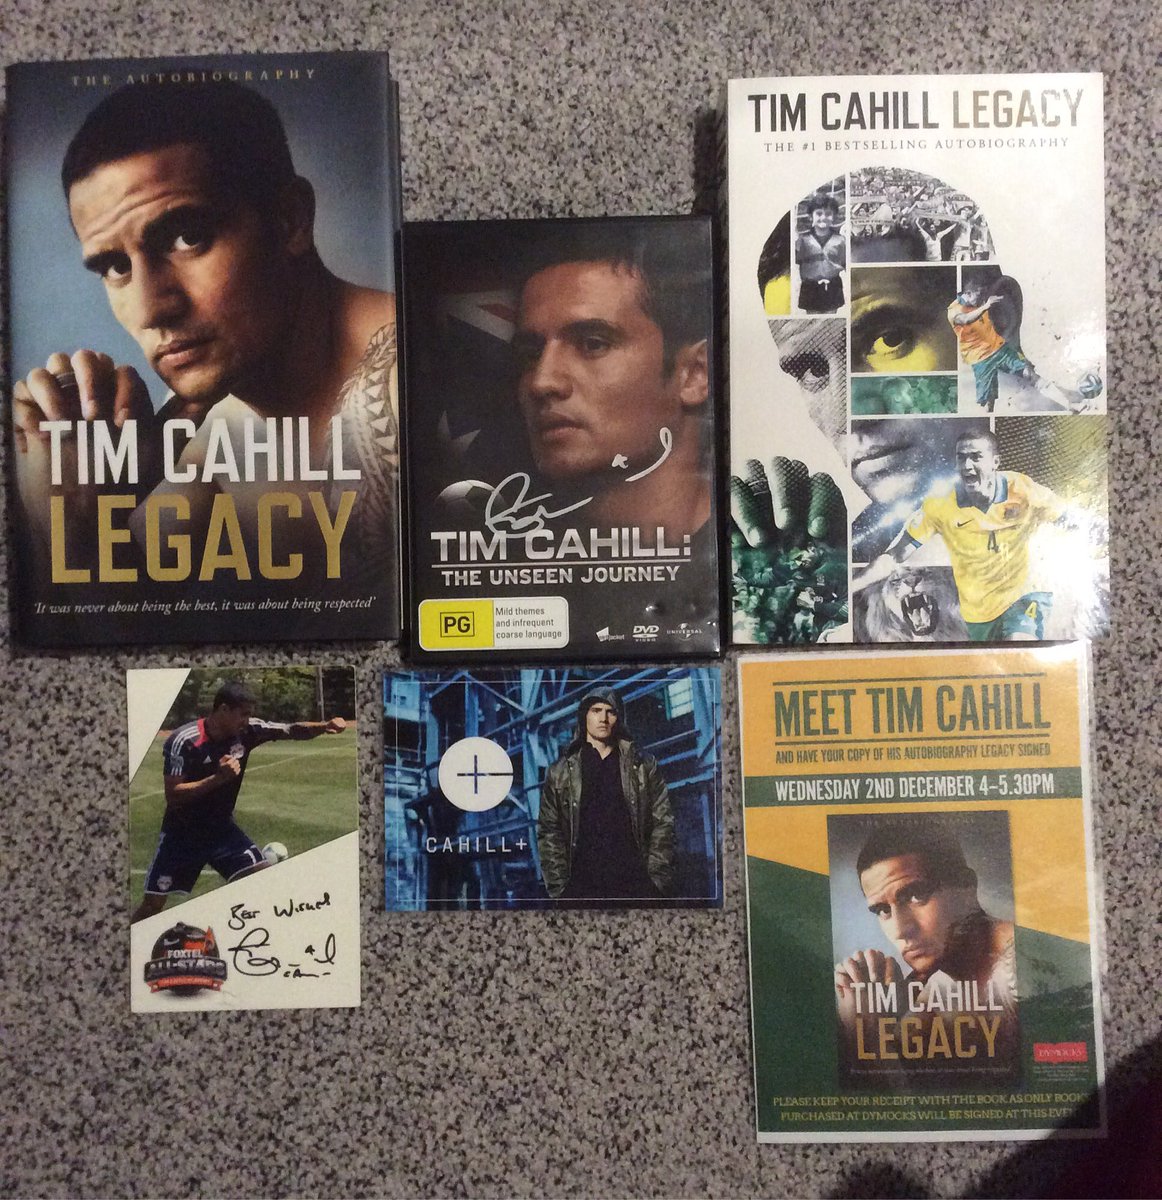 @Tim_Cahill before #legacy, there was #theunseenjourney. See you tonight @SportsWritersAU two @Everton fans in 🇸🇬 asked me to buy 2 📚👊🏼⚽️